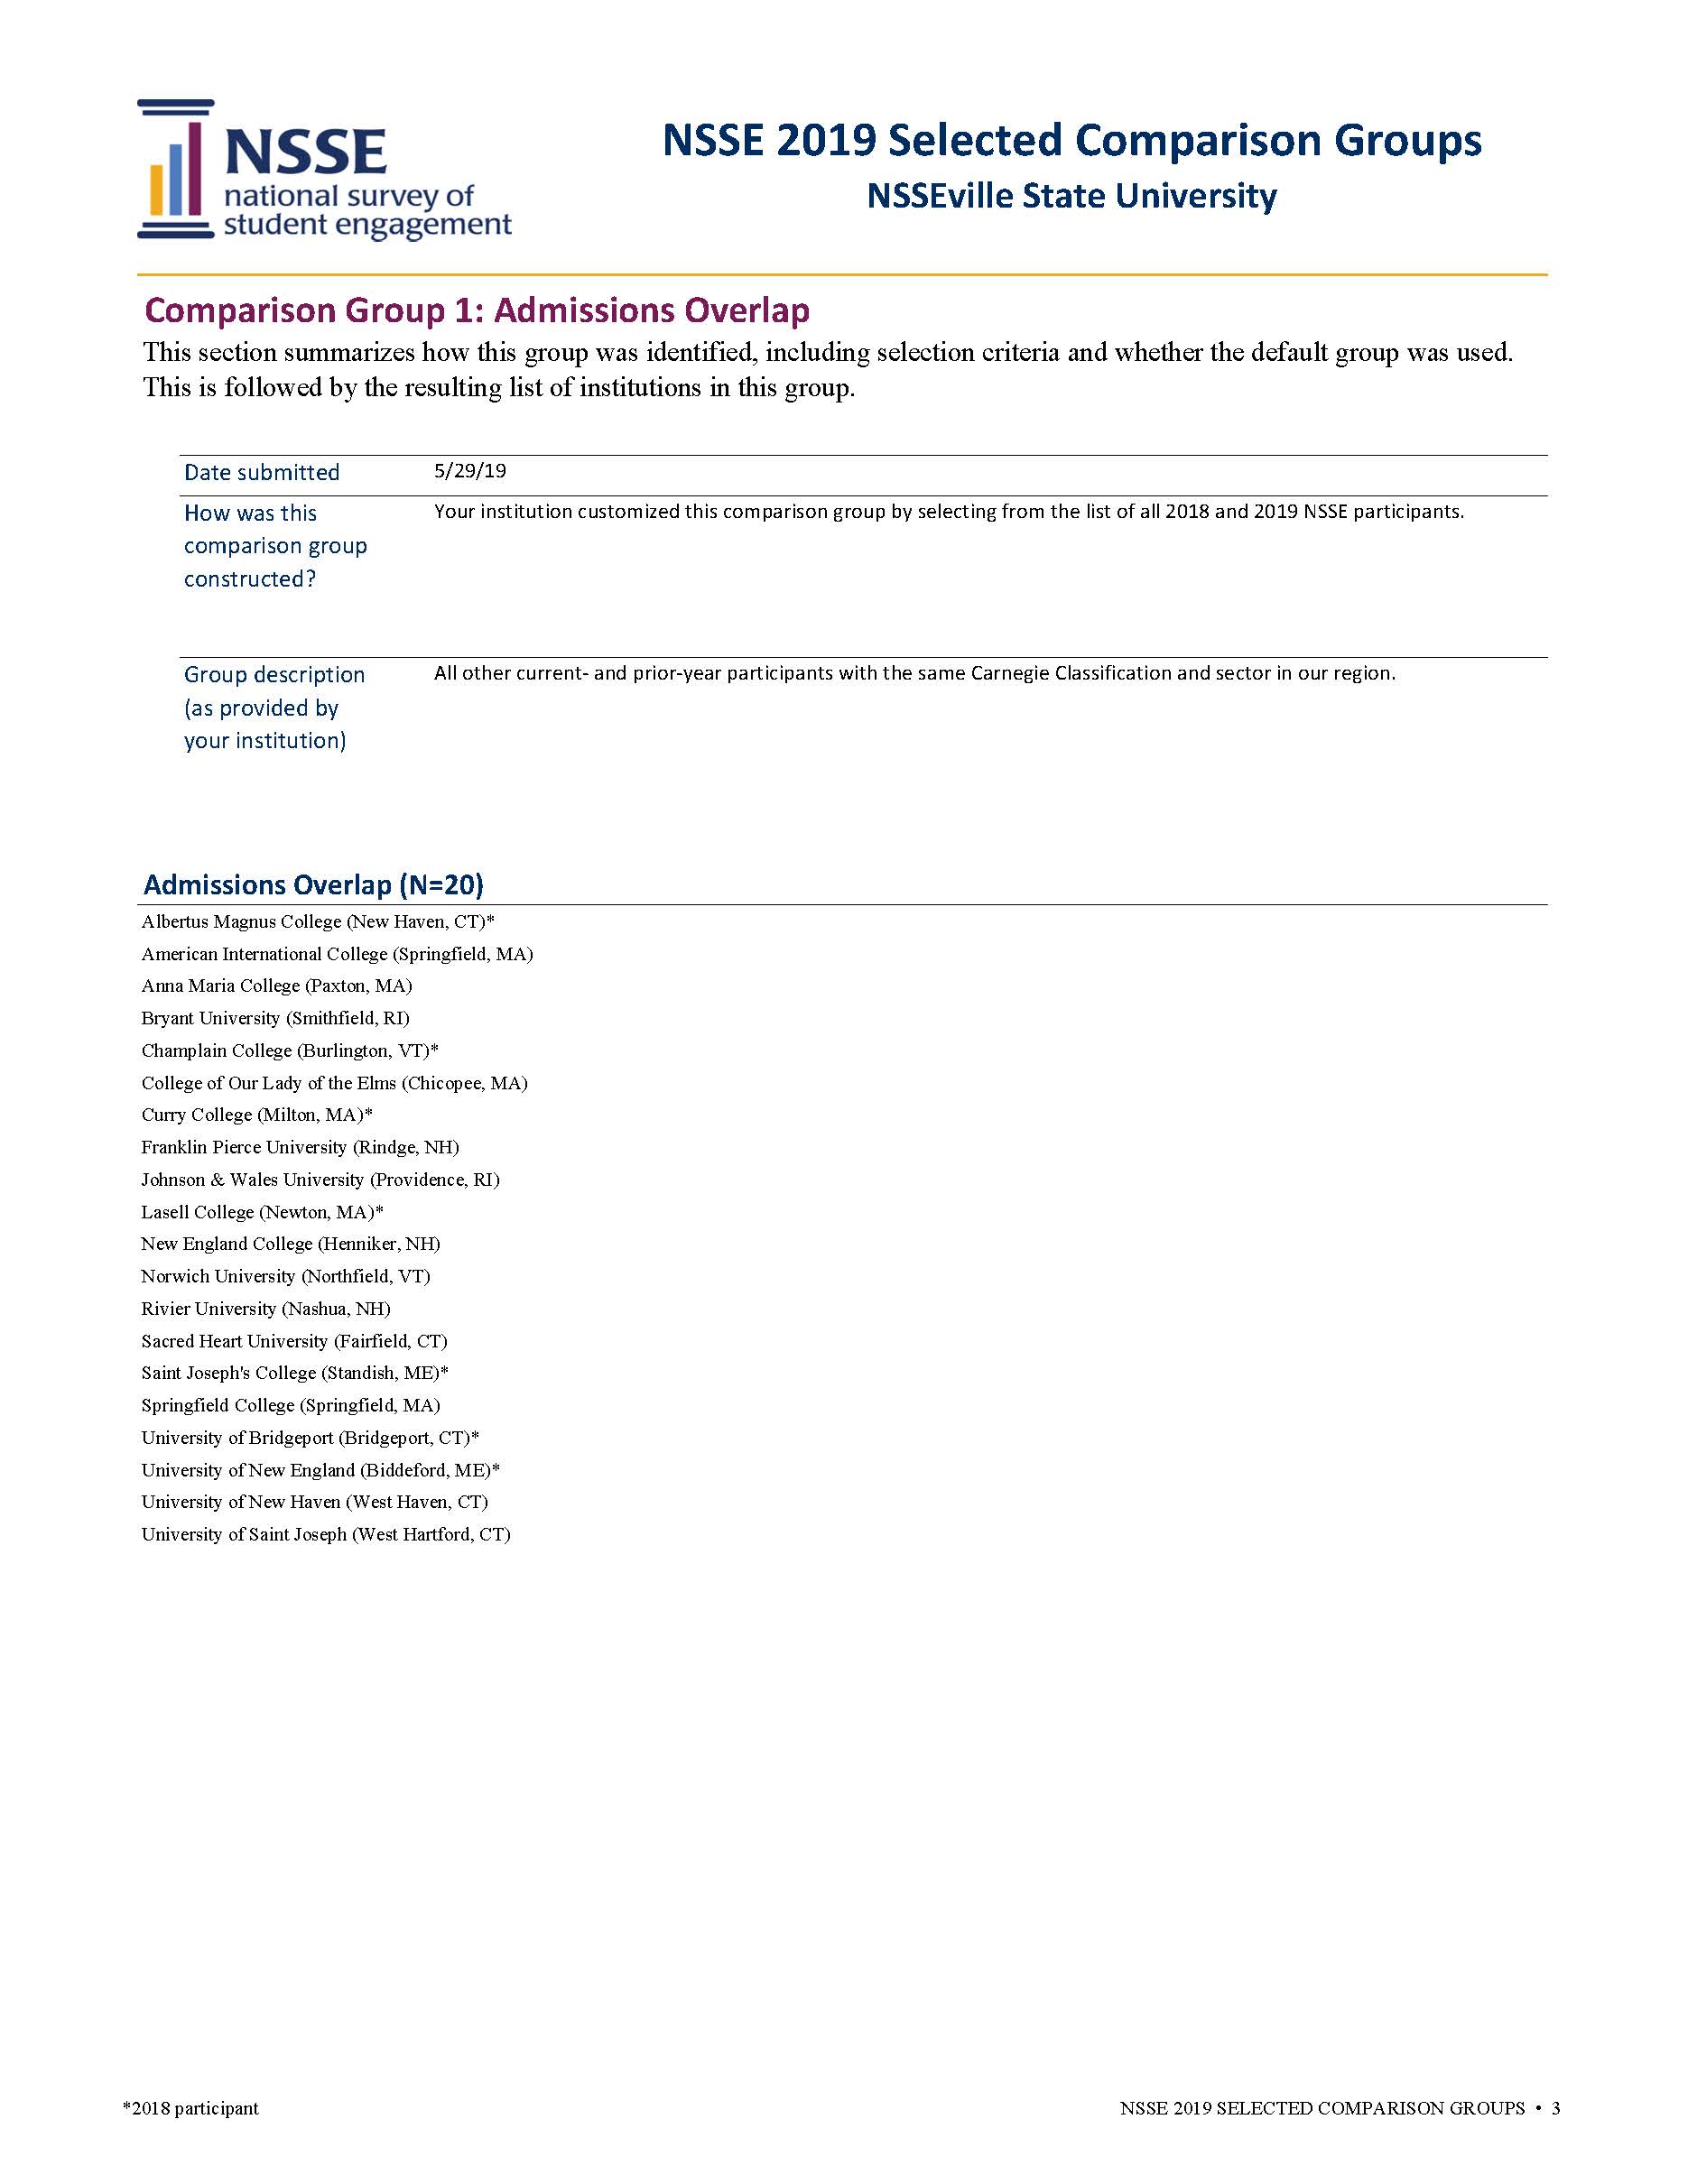 Sample Report: page 3 of NSSE Selected Comparison Groups